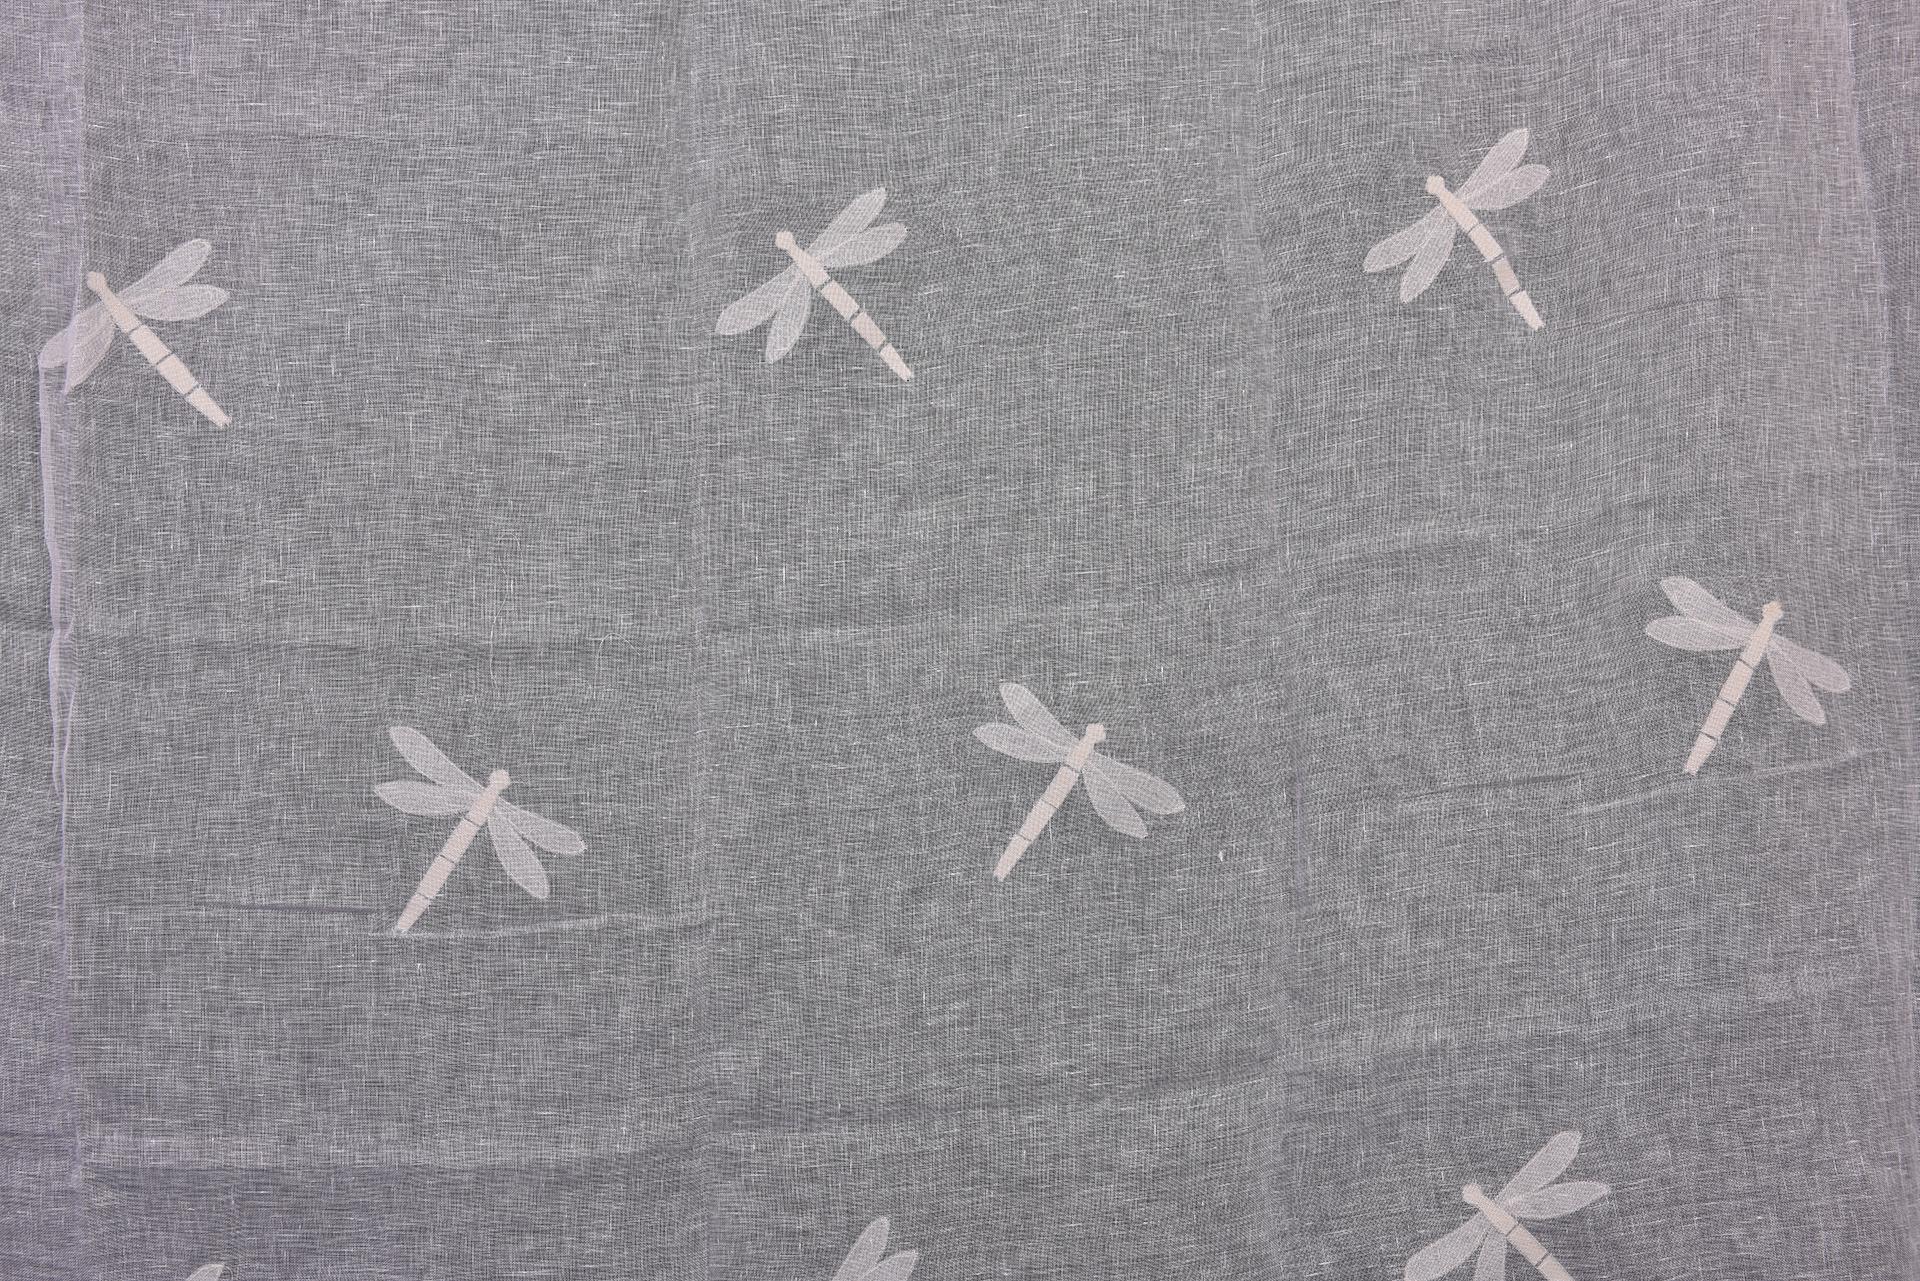 Linen Large Curtain Named Dragonfly In Excellent Condition For Sale In Alessandria, Piemonte